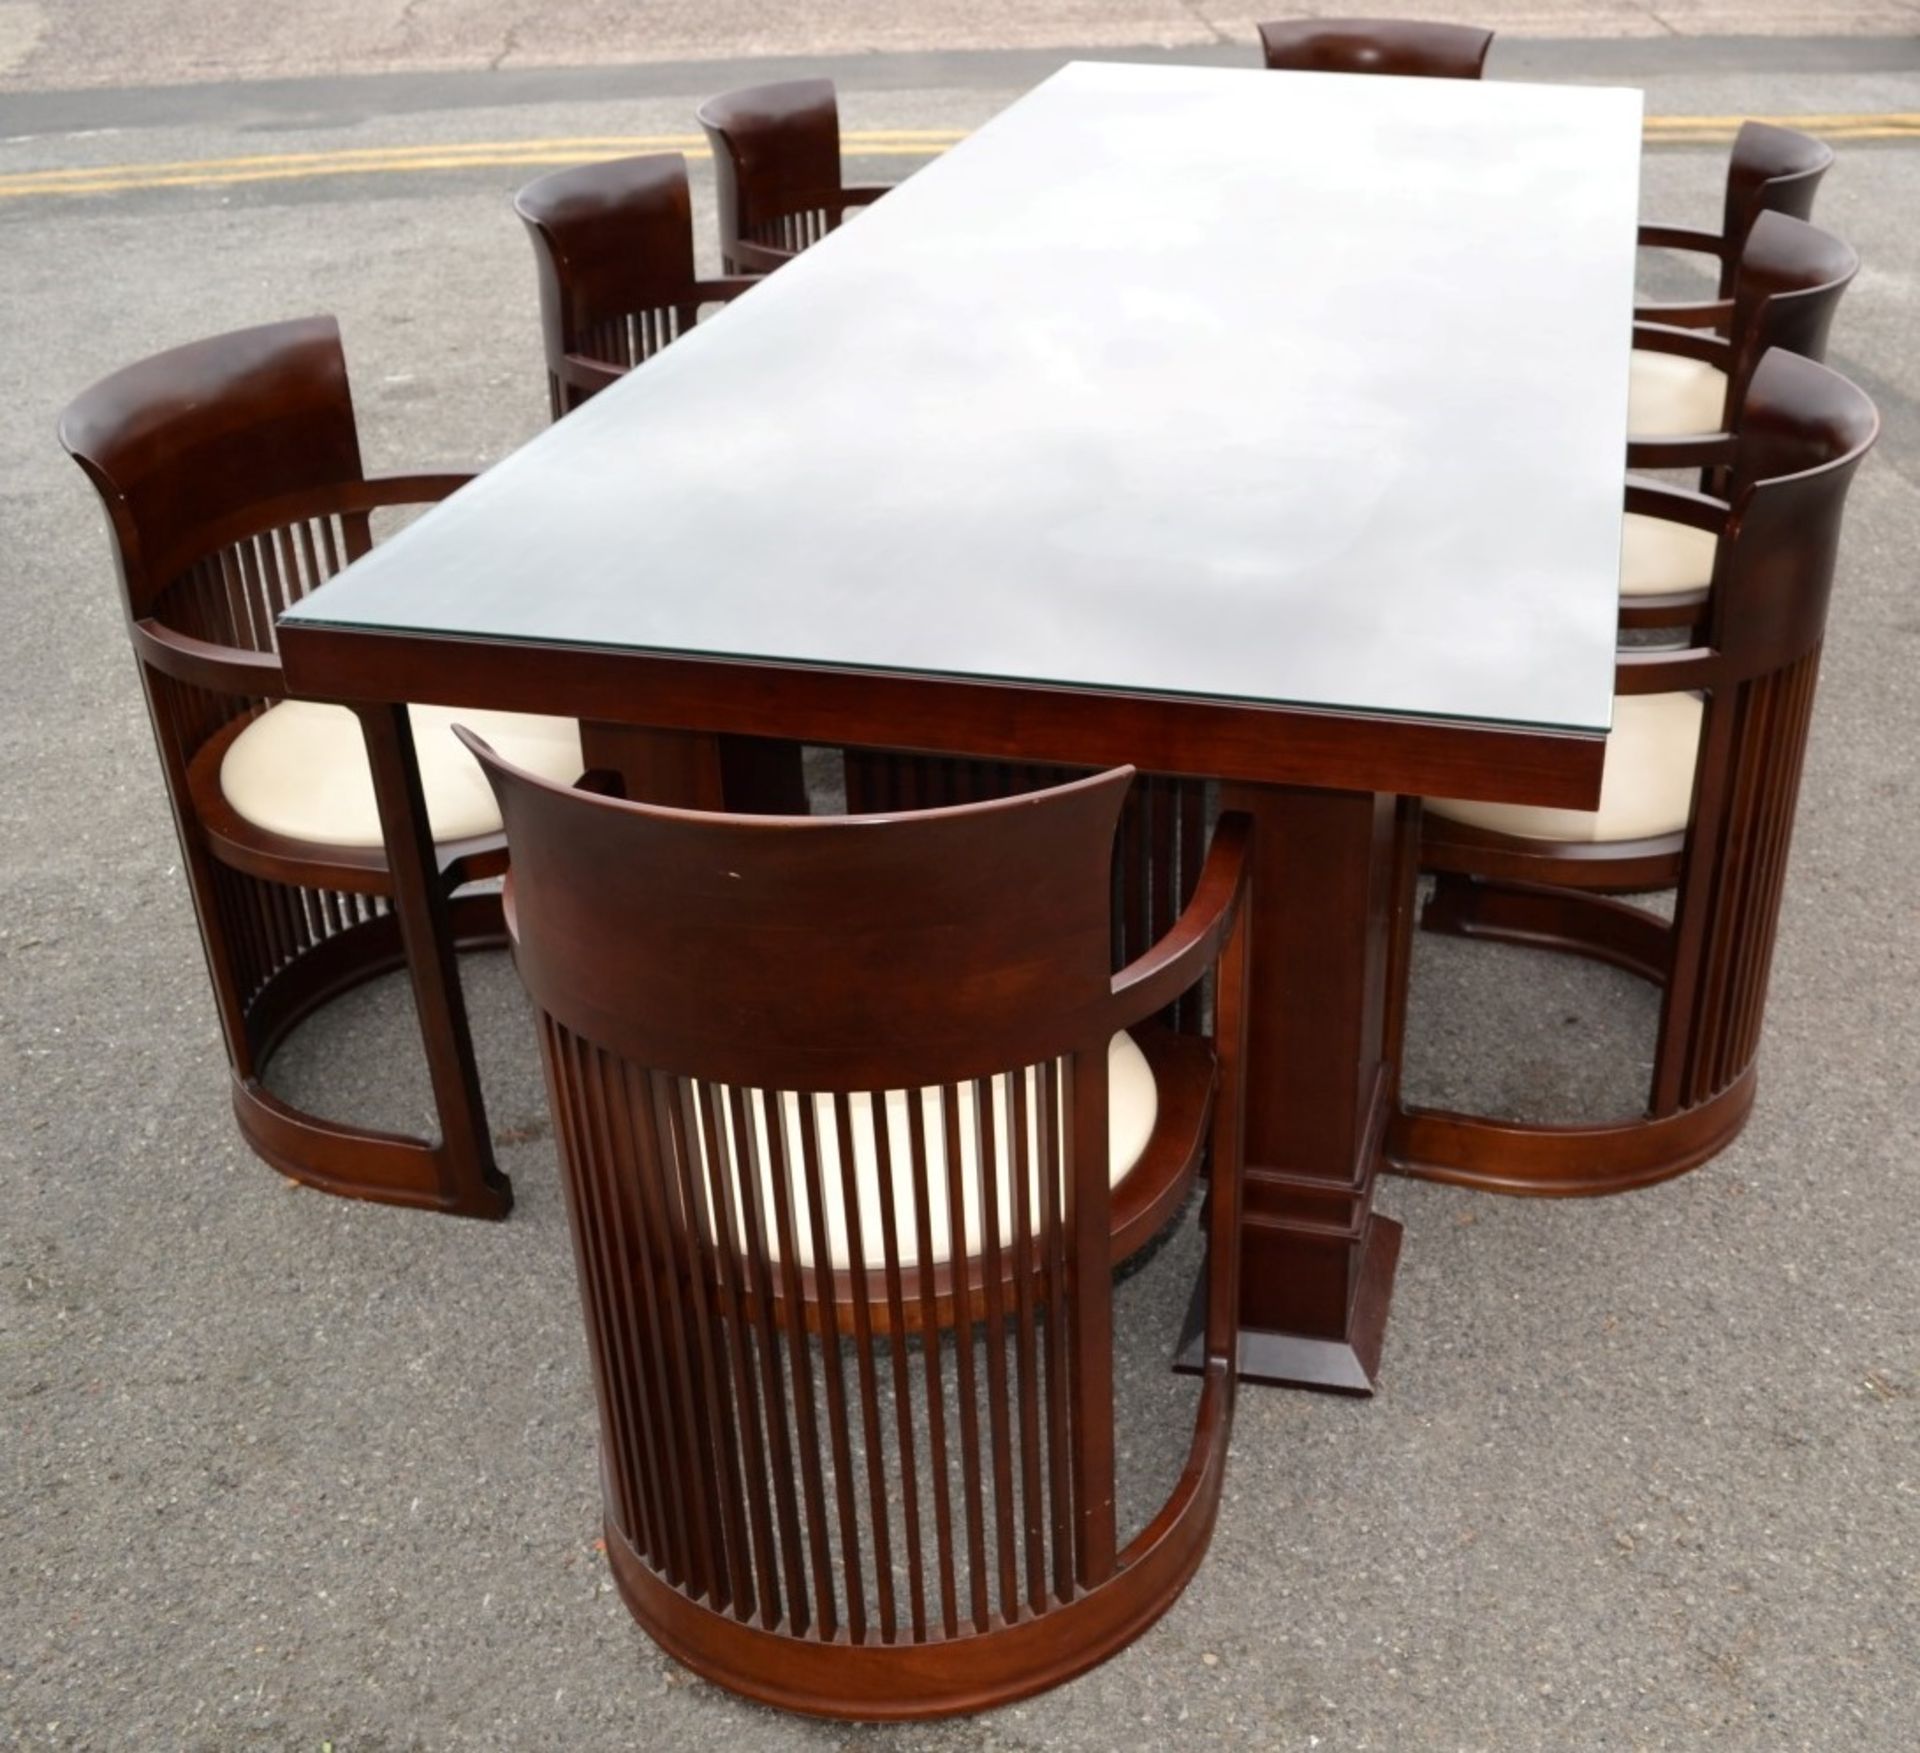 1 x Large Wooden Dining Table In The Style Of Frank Lloyd Wright + 8 x Dining Armchairs - NO VAT